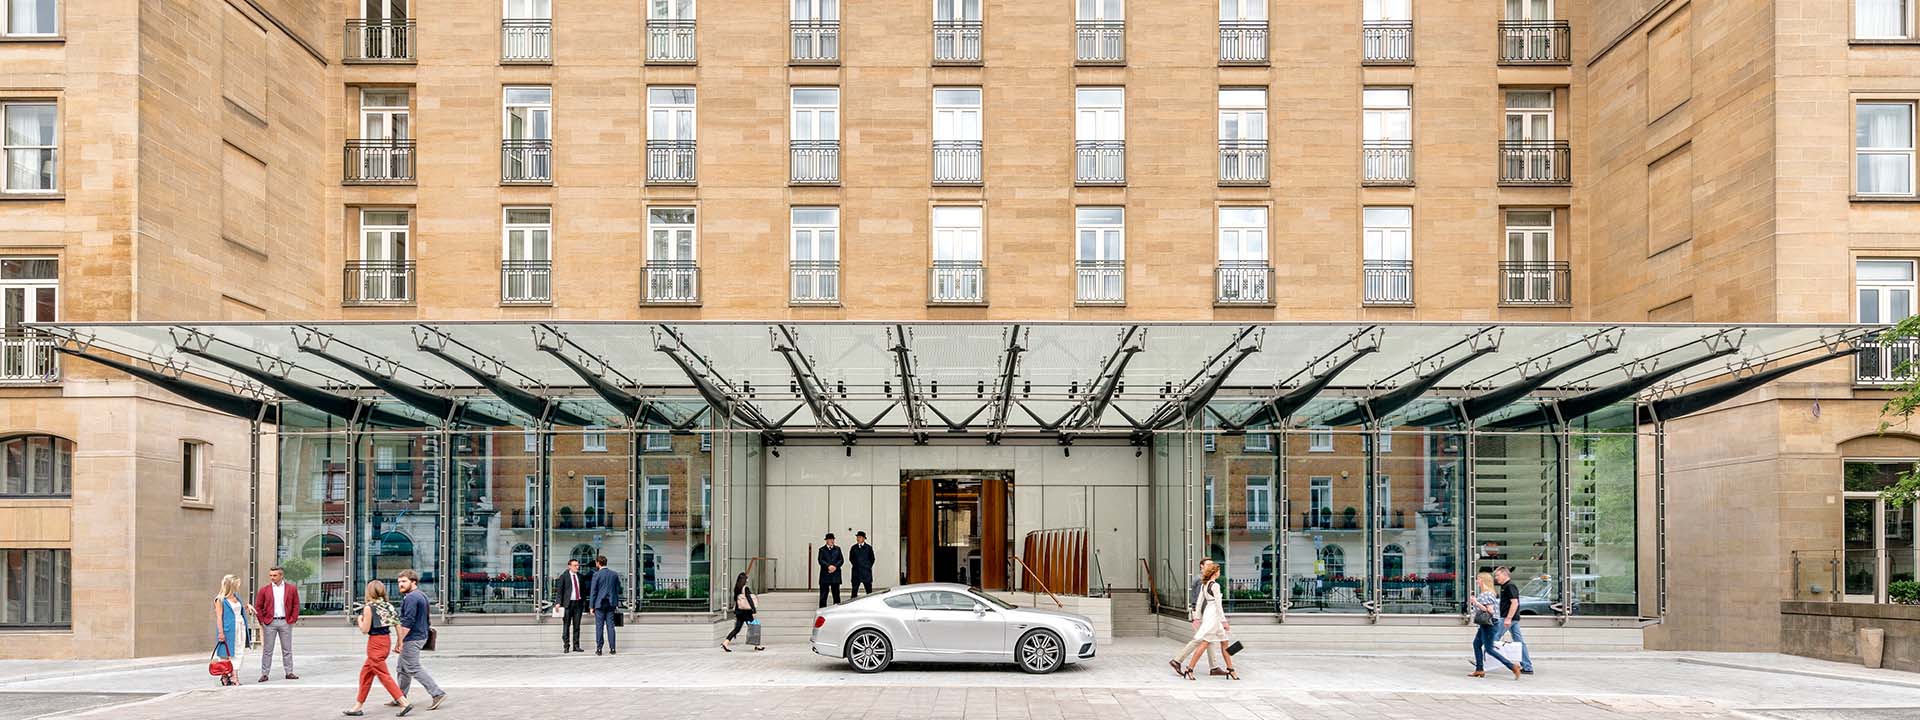 A car in front of the entrance of The Berkeley hotel, as well as passers-by and hotel guests.